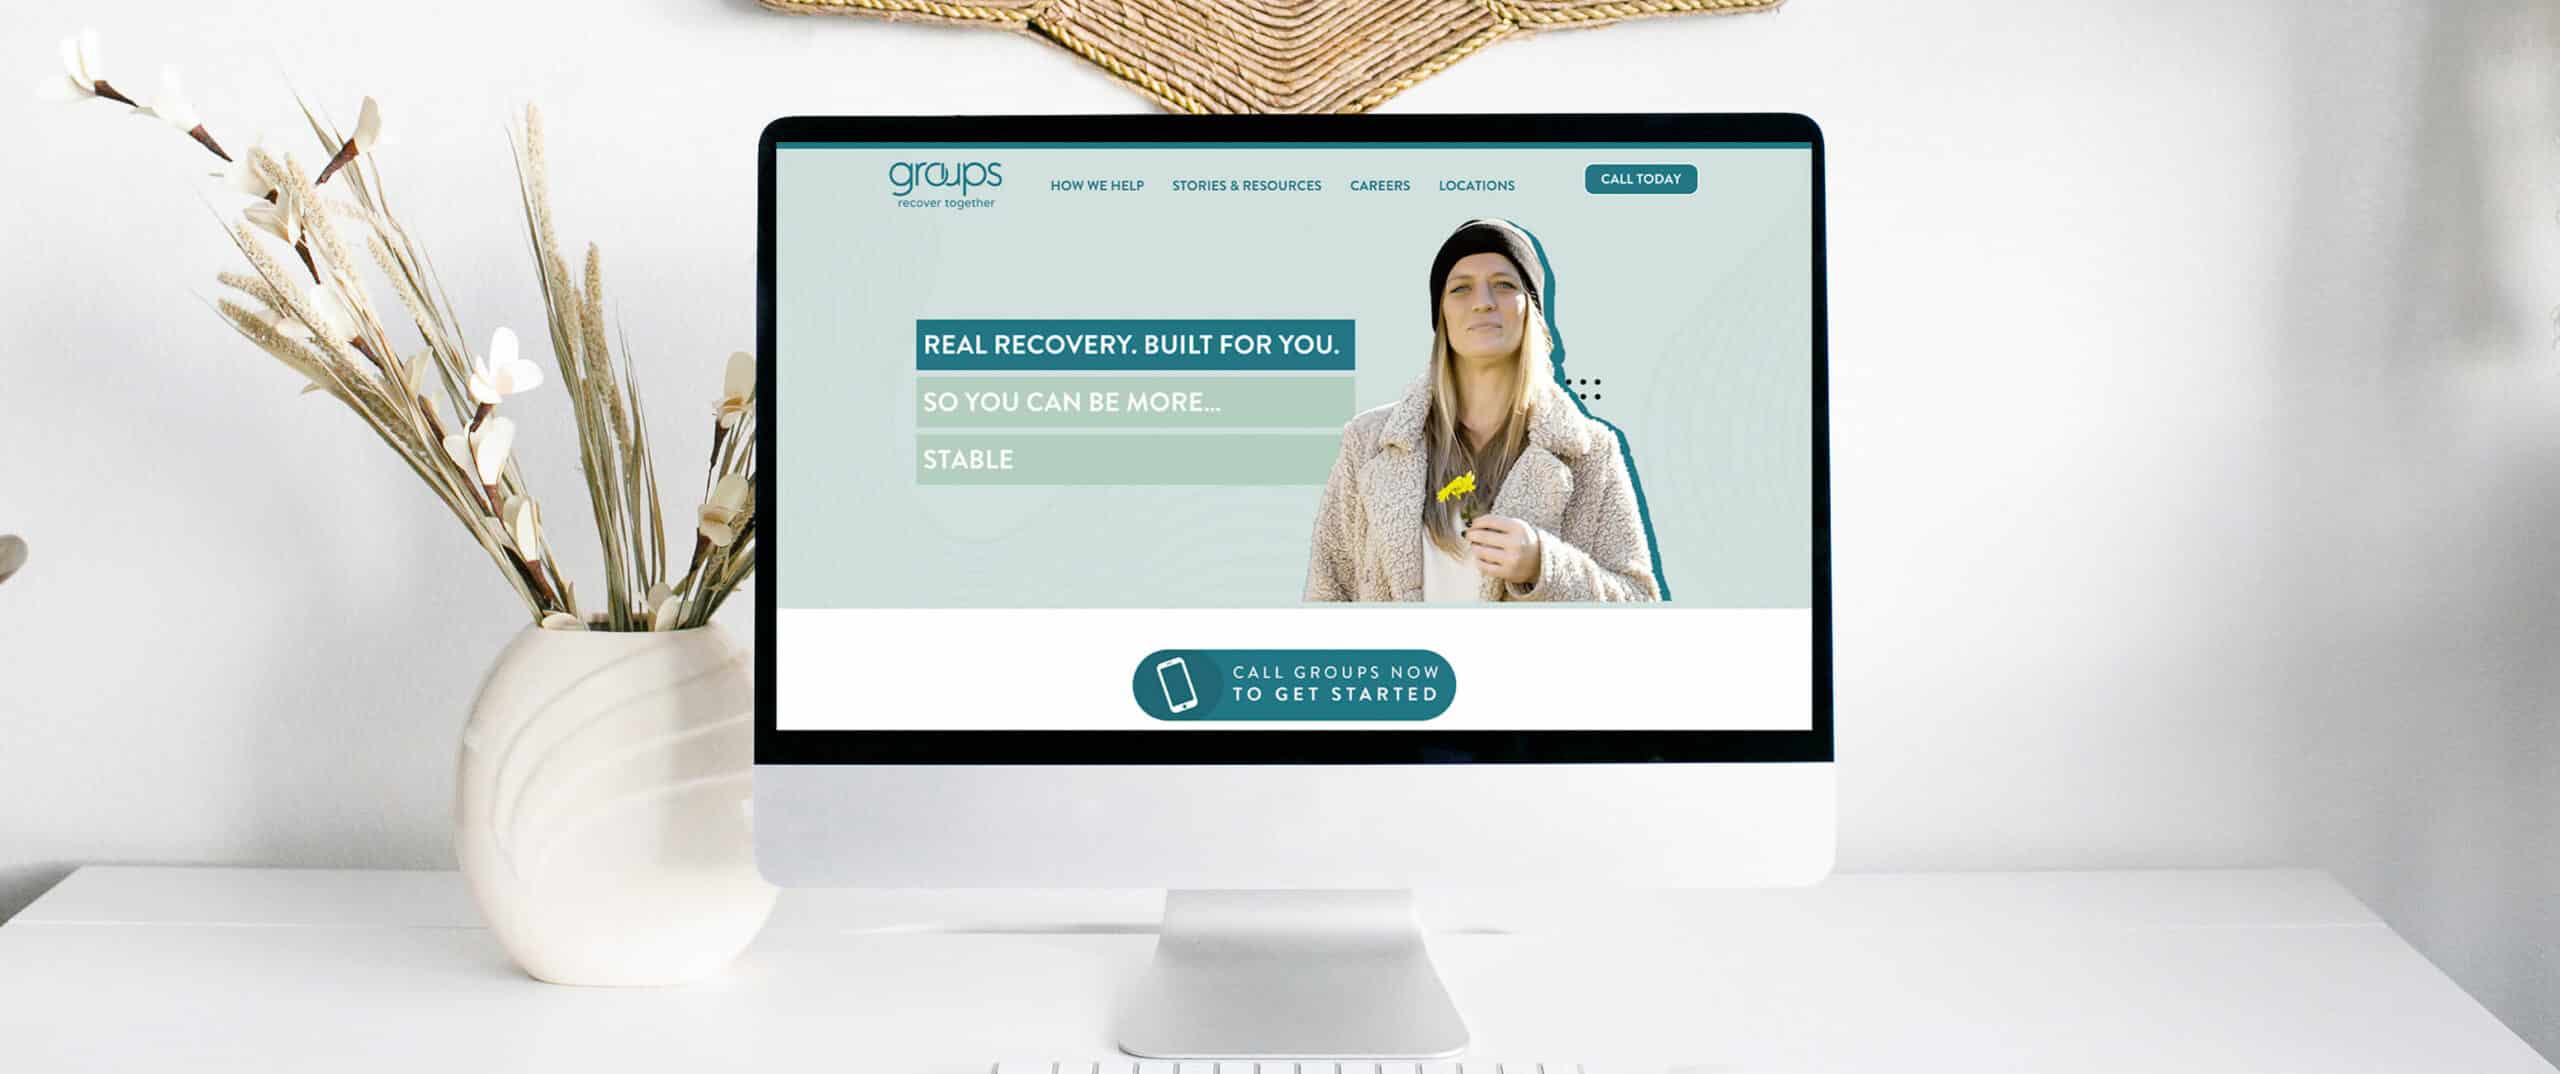 Groups Recover Together header image - recovery groups website ideas and template